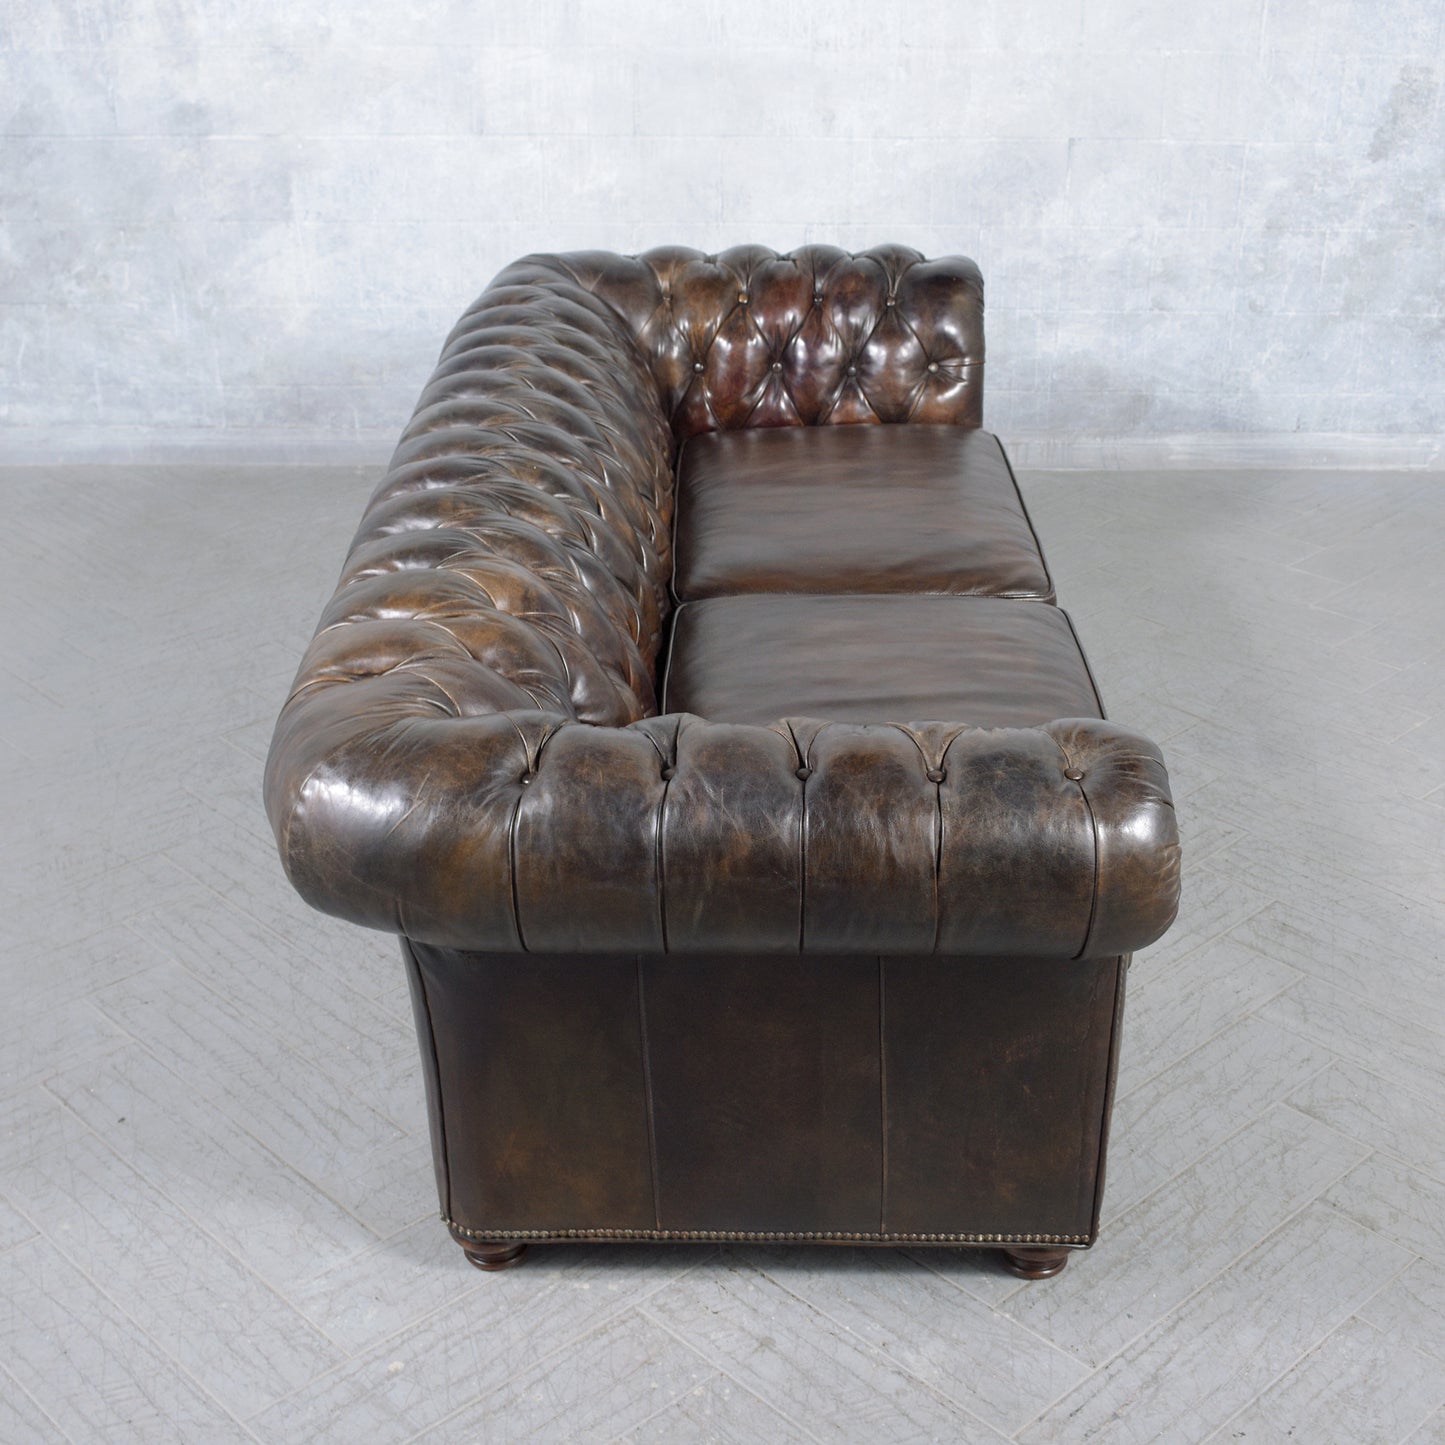 Handcrafted Original 1970s Vintage Brown Leather Chesterfield Sofa